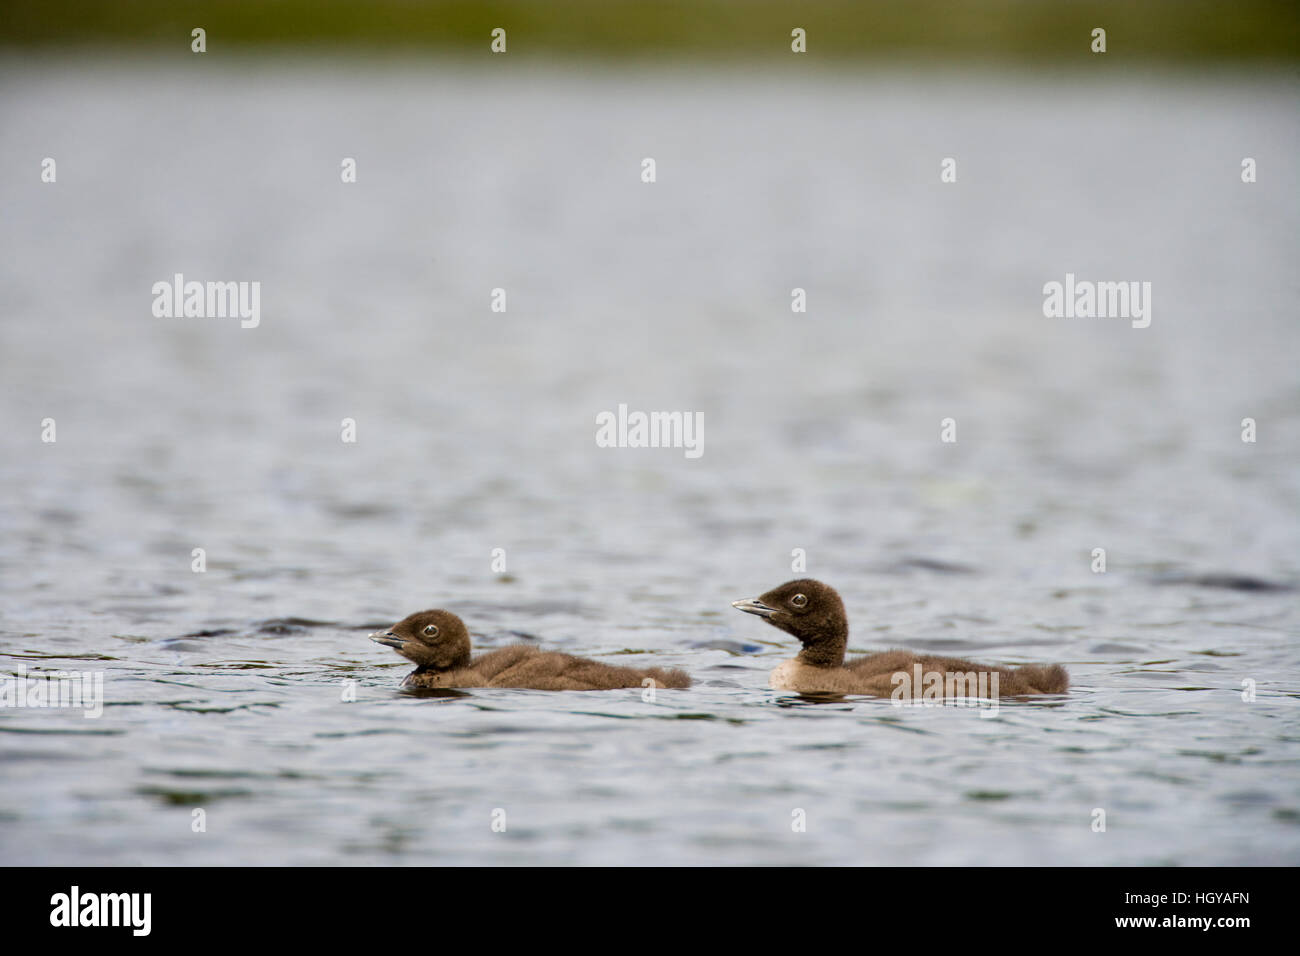 Common loon chicks, Gavia immer,  on East Inlet in Pittsburg, New Hampshire.  A pond upstream of Second Connecticut Lake. Stock Photo